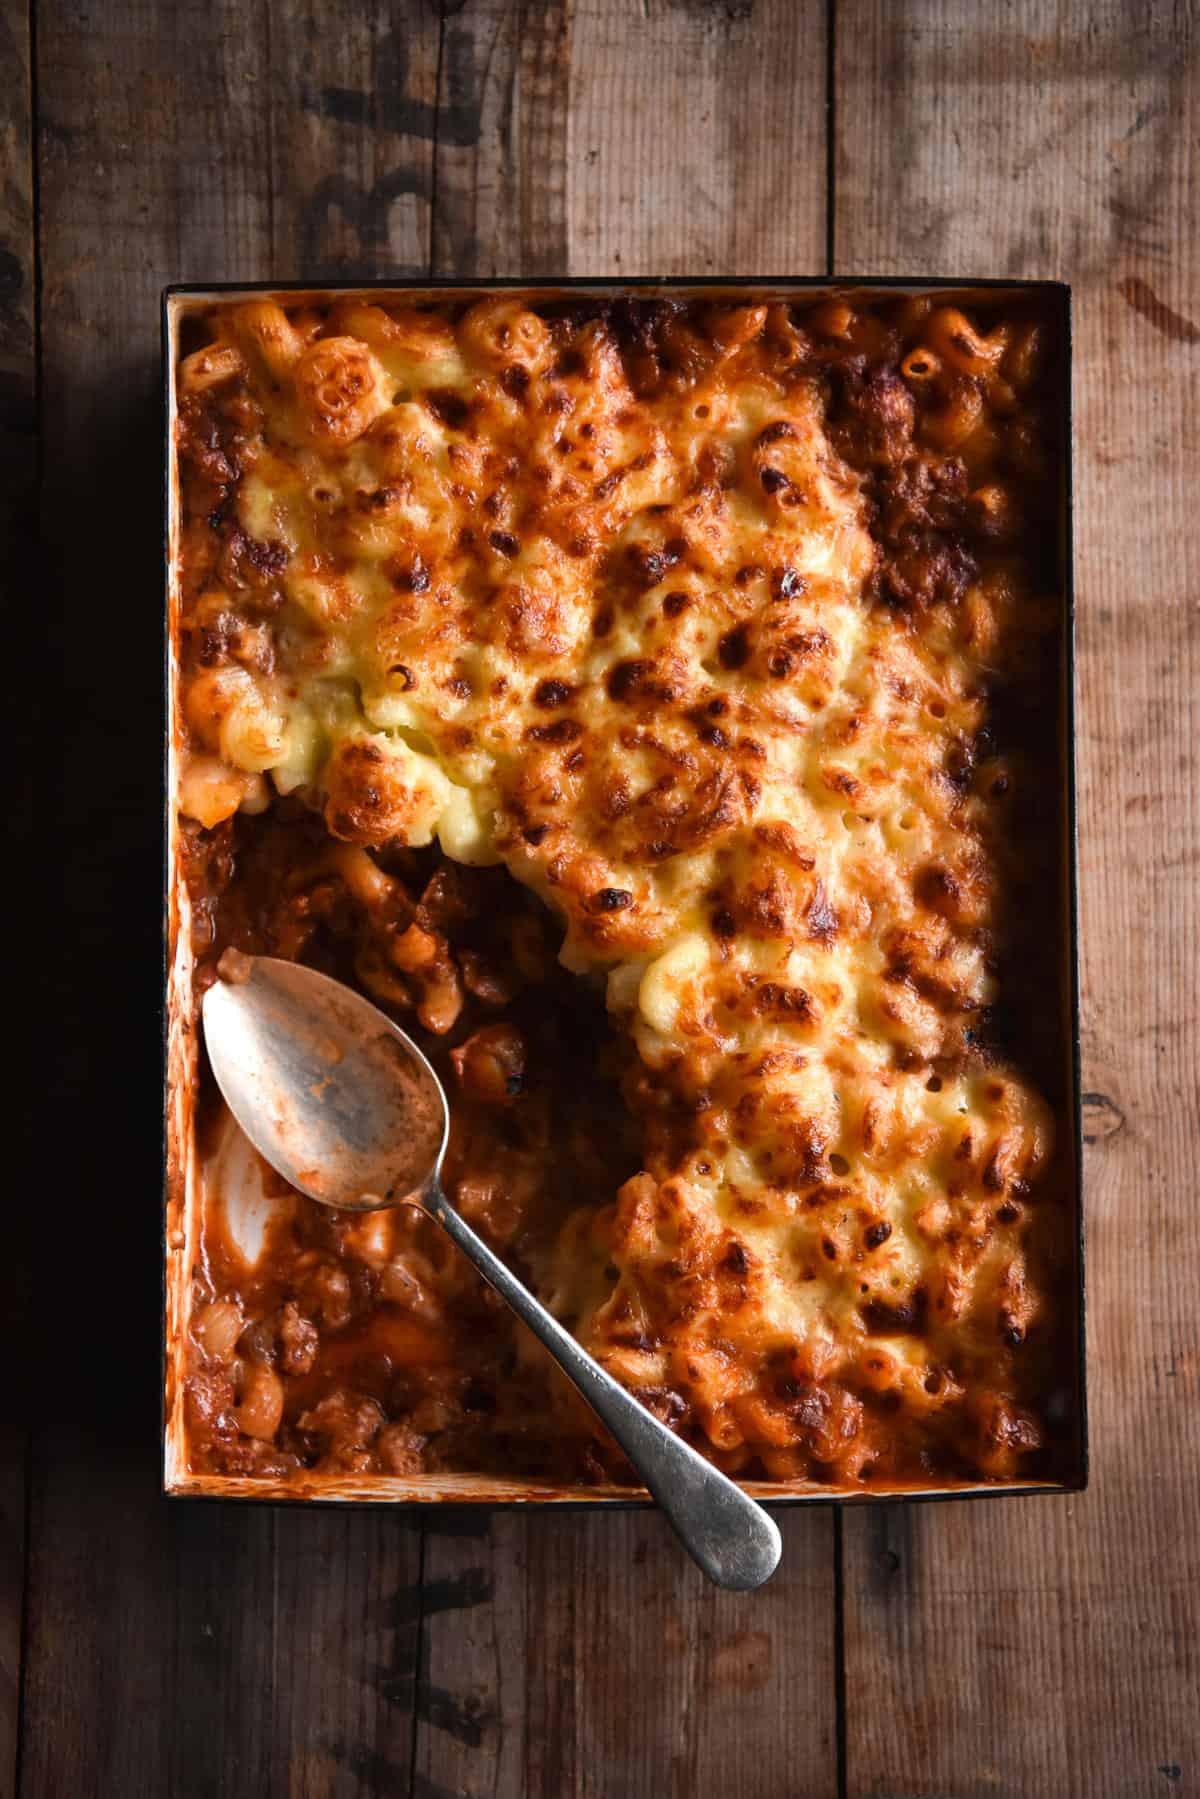 Vegetarian bolognese mac and cheese bake from www.georgeats.com. Gluten free, FODMAP friendly, nut free and vegan adaptable.